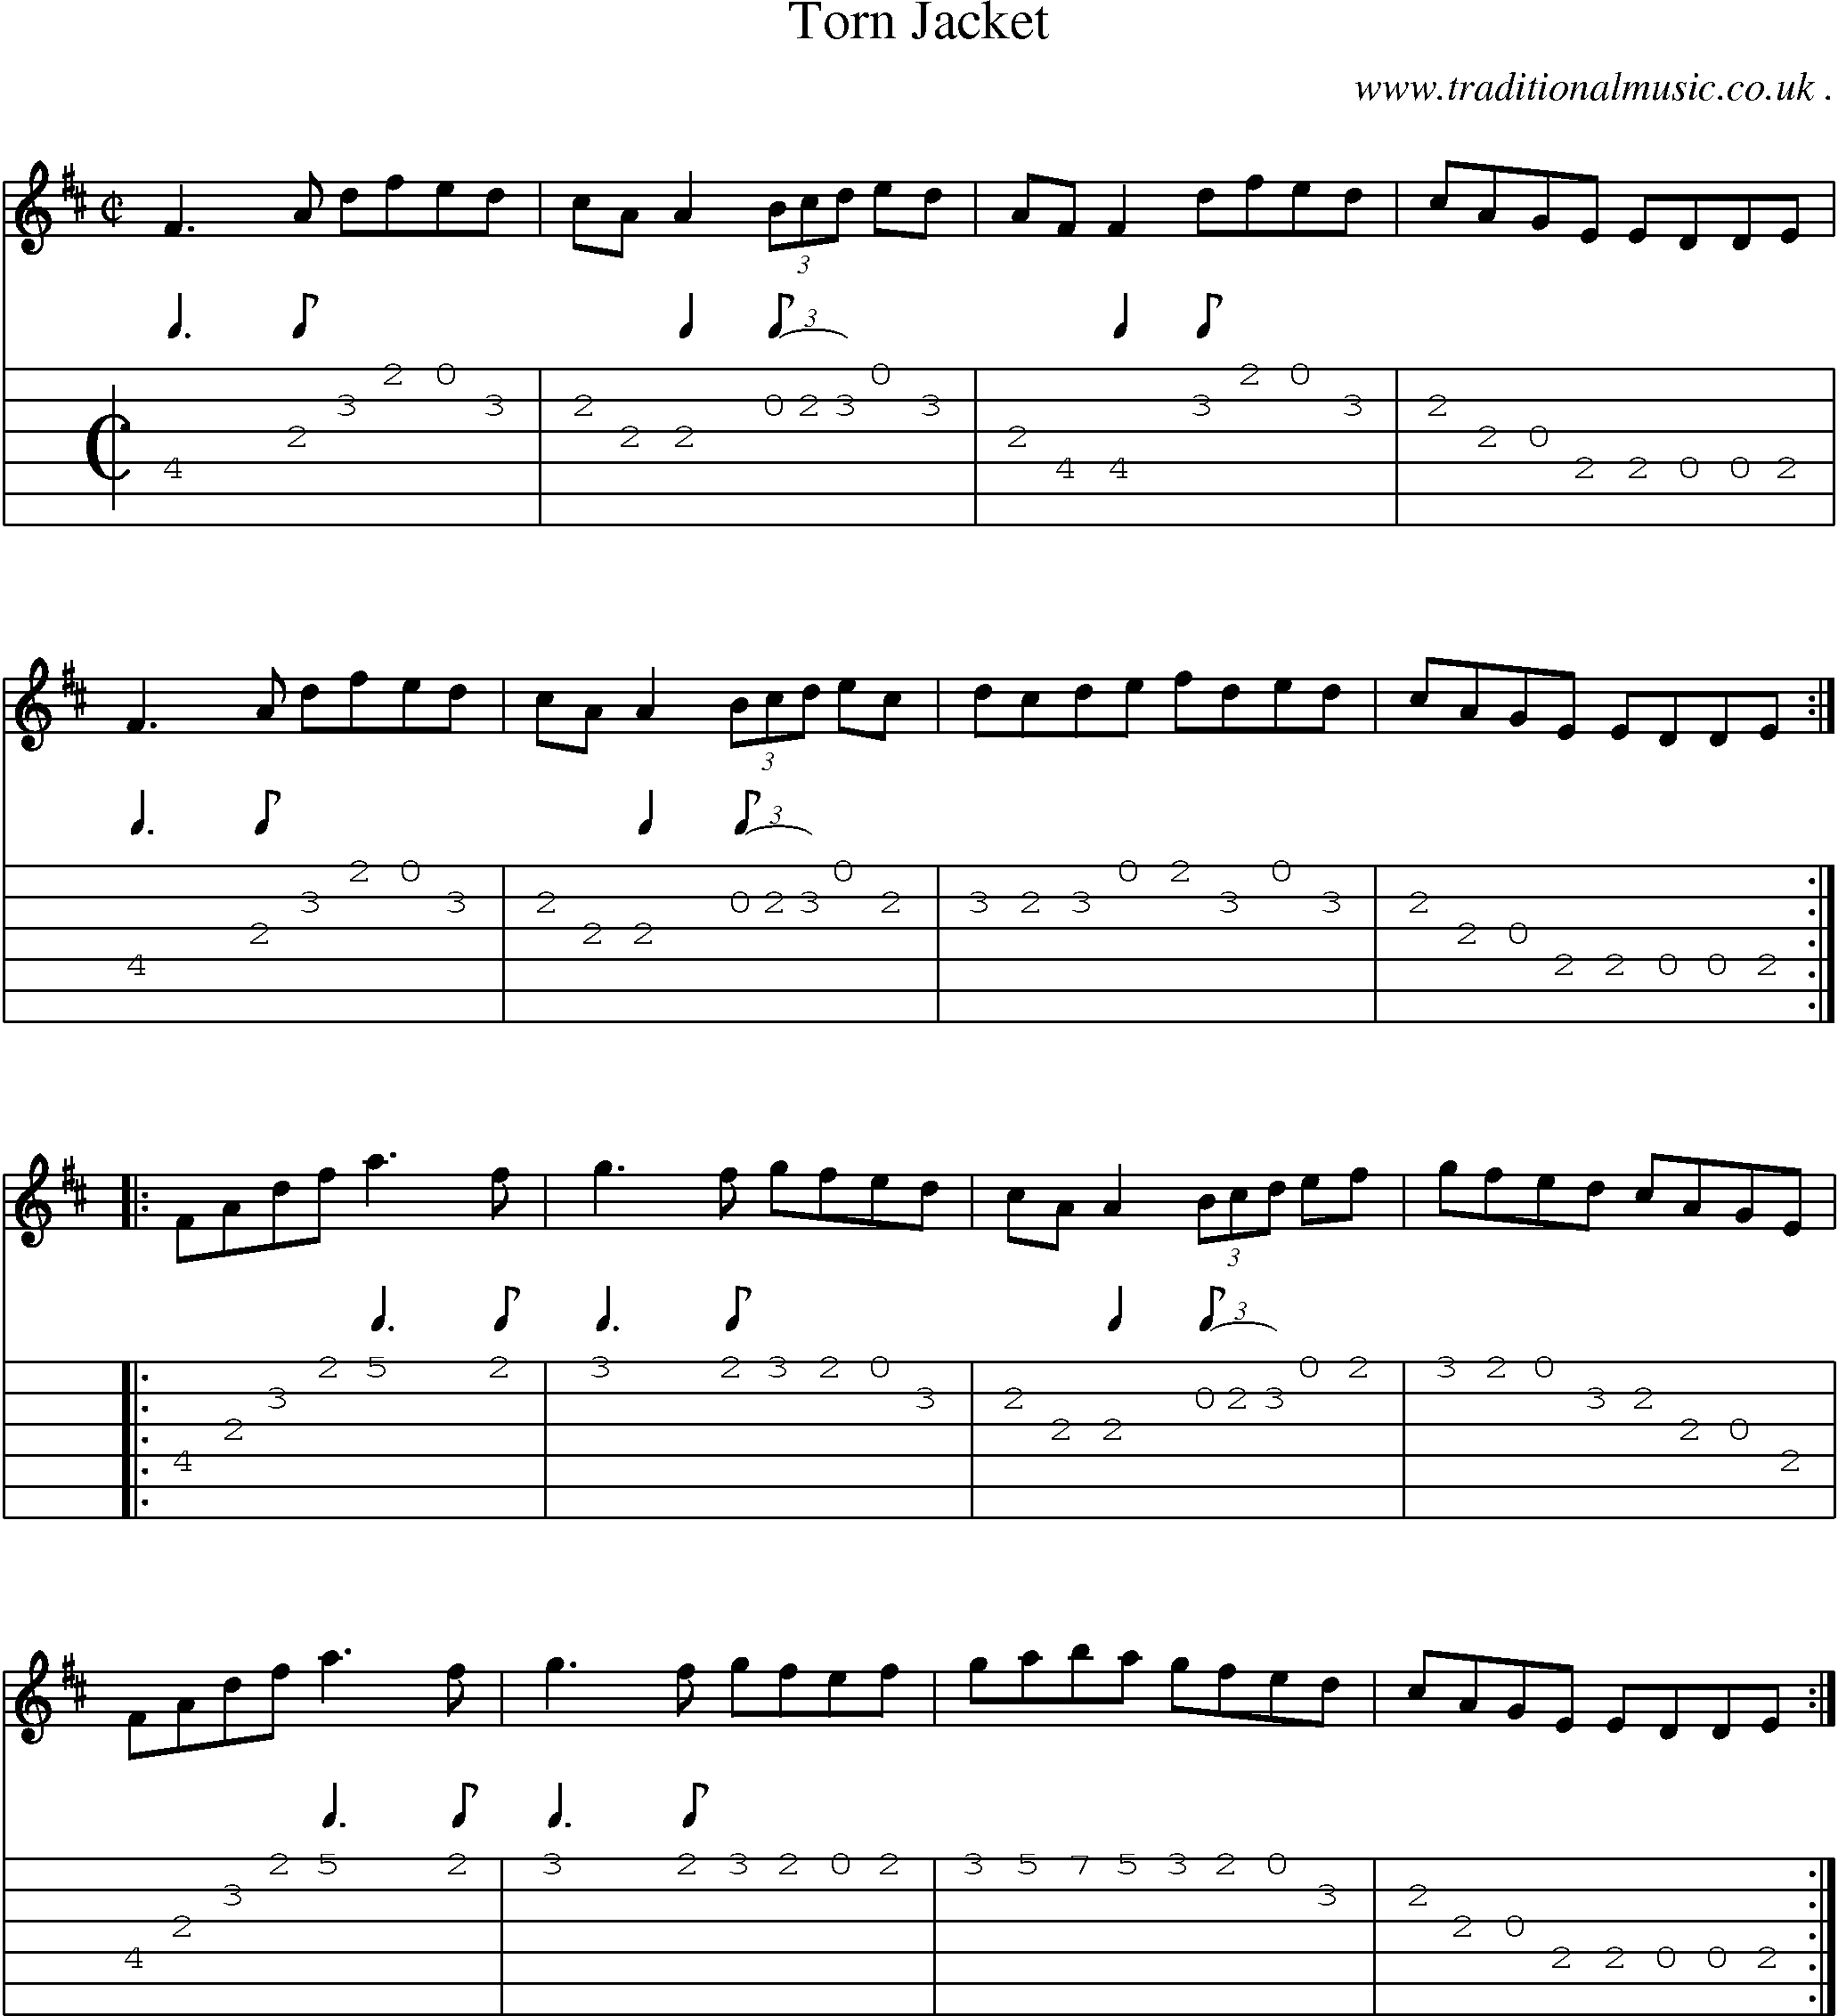 Sheet-Music and Guitar Tabs for Torn Jacket